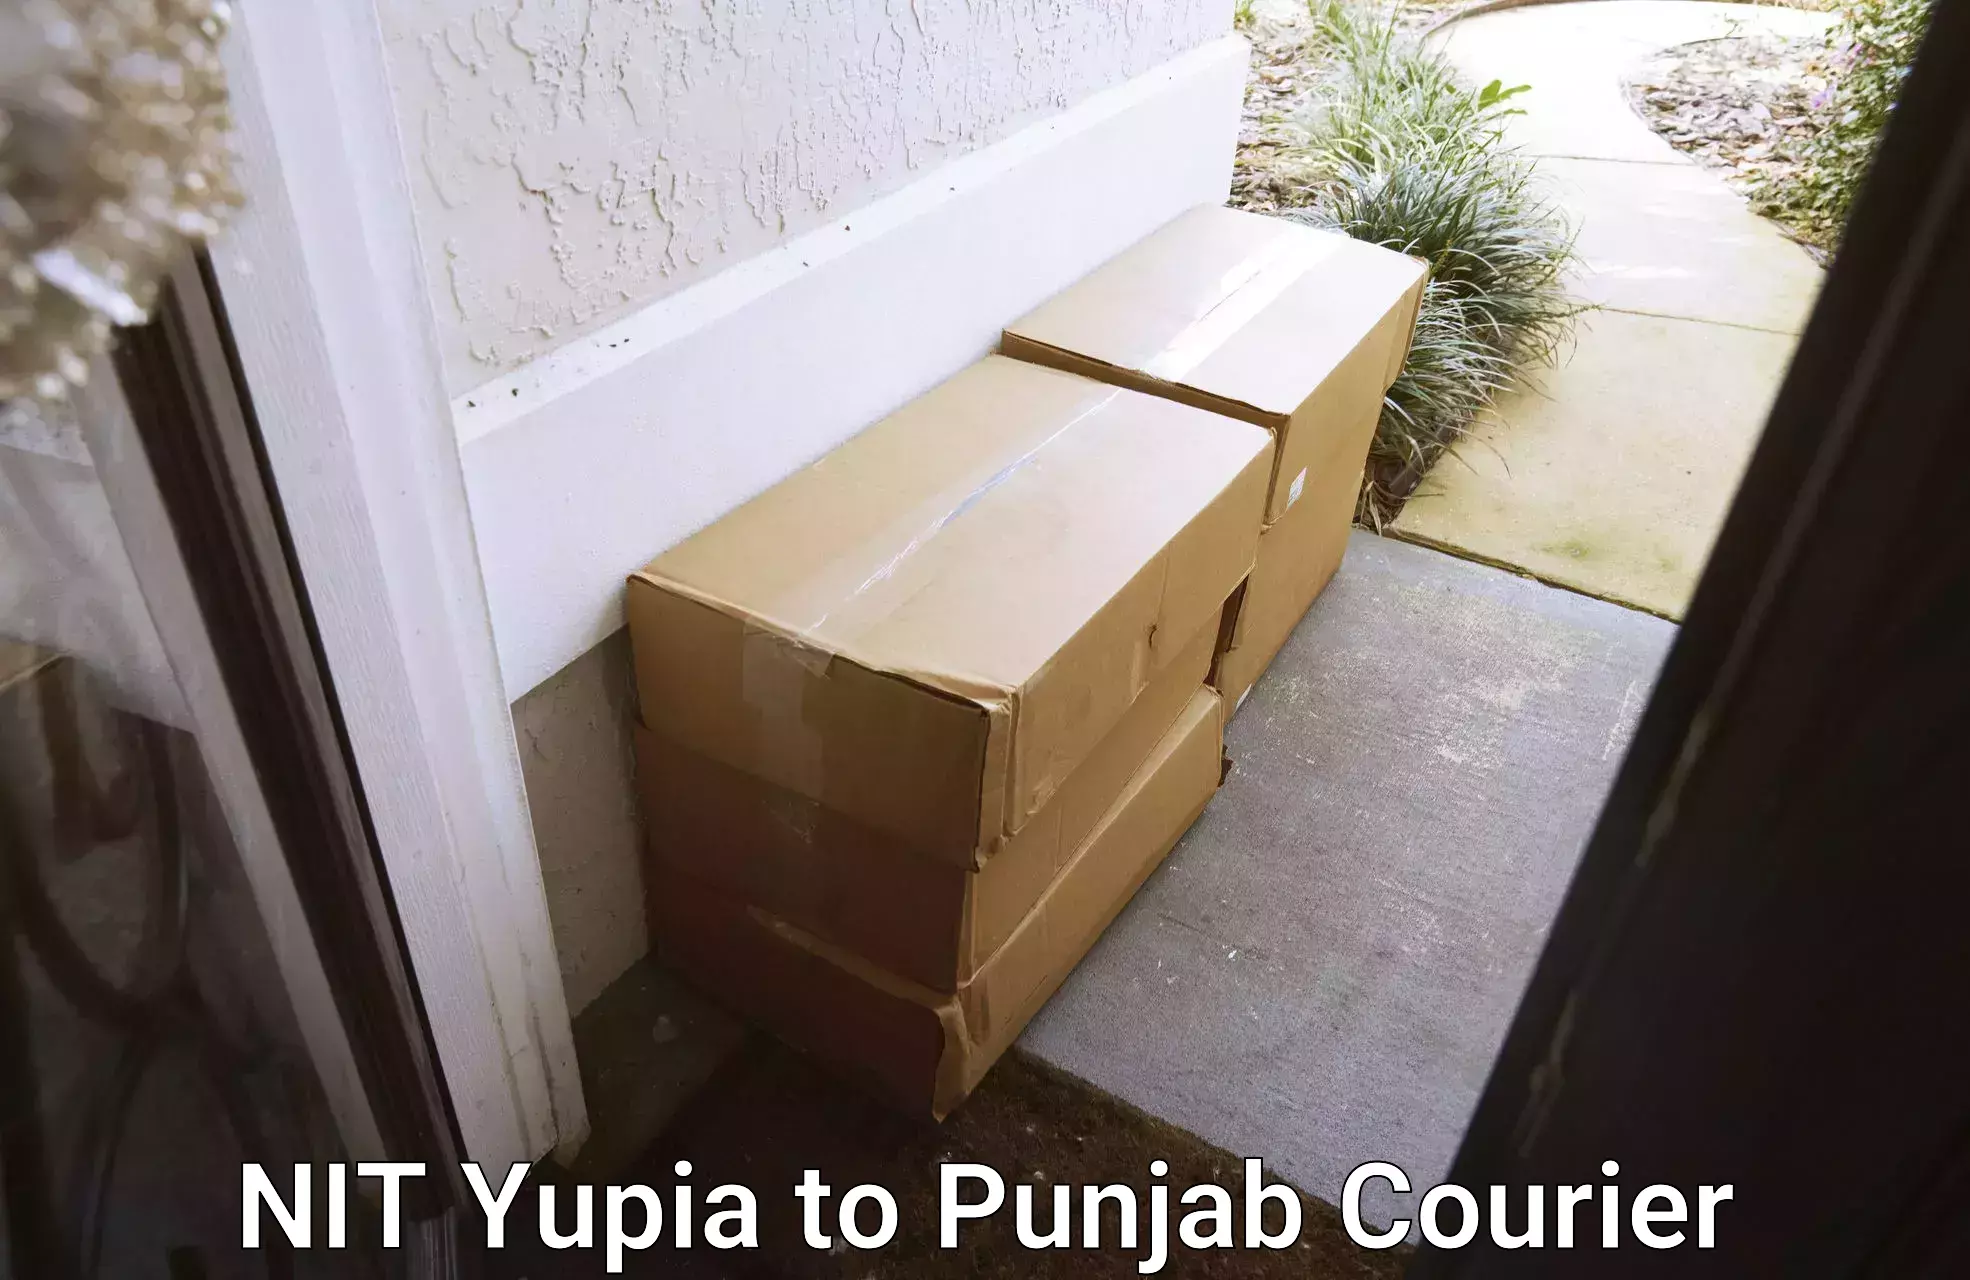 24-hour courier service in NIT Yupia to Mansa